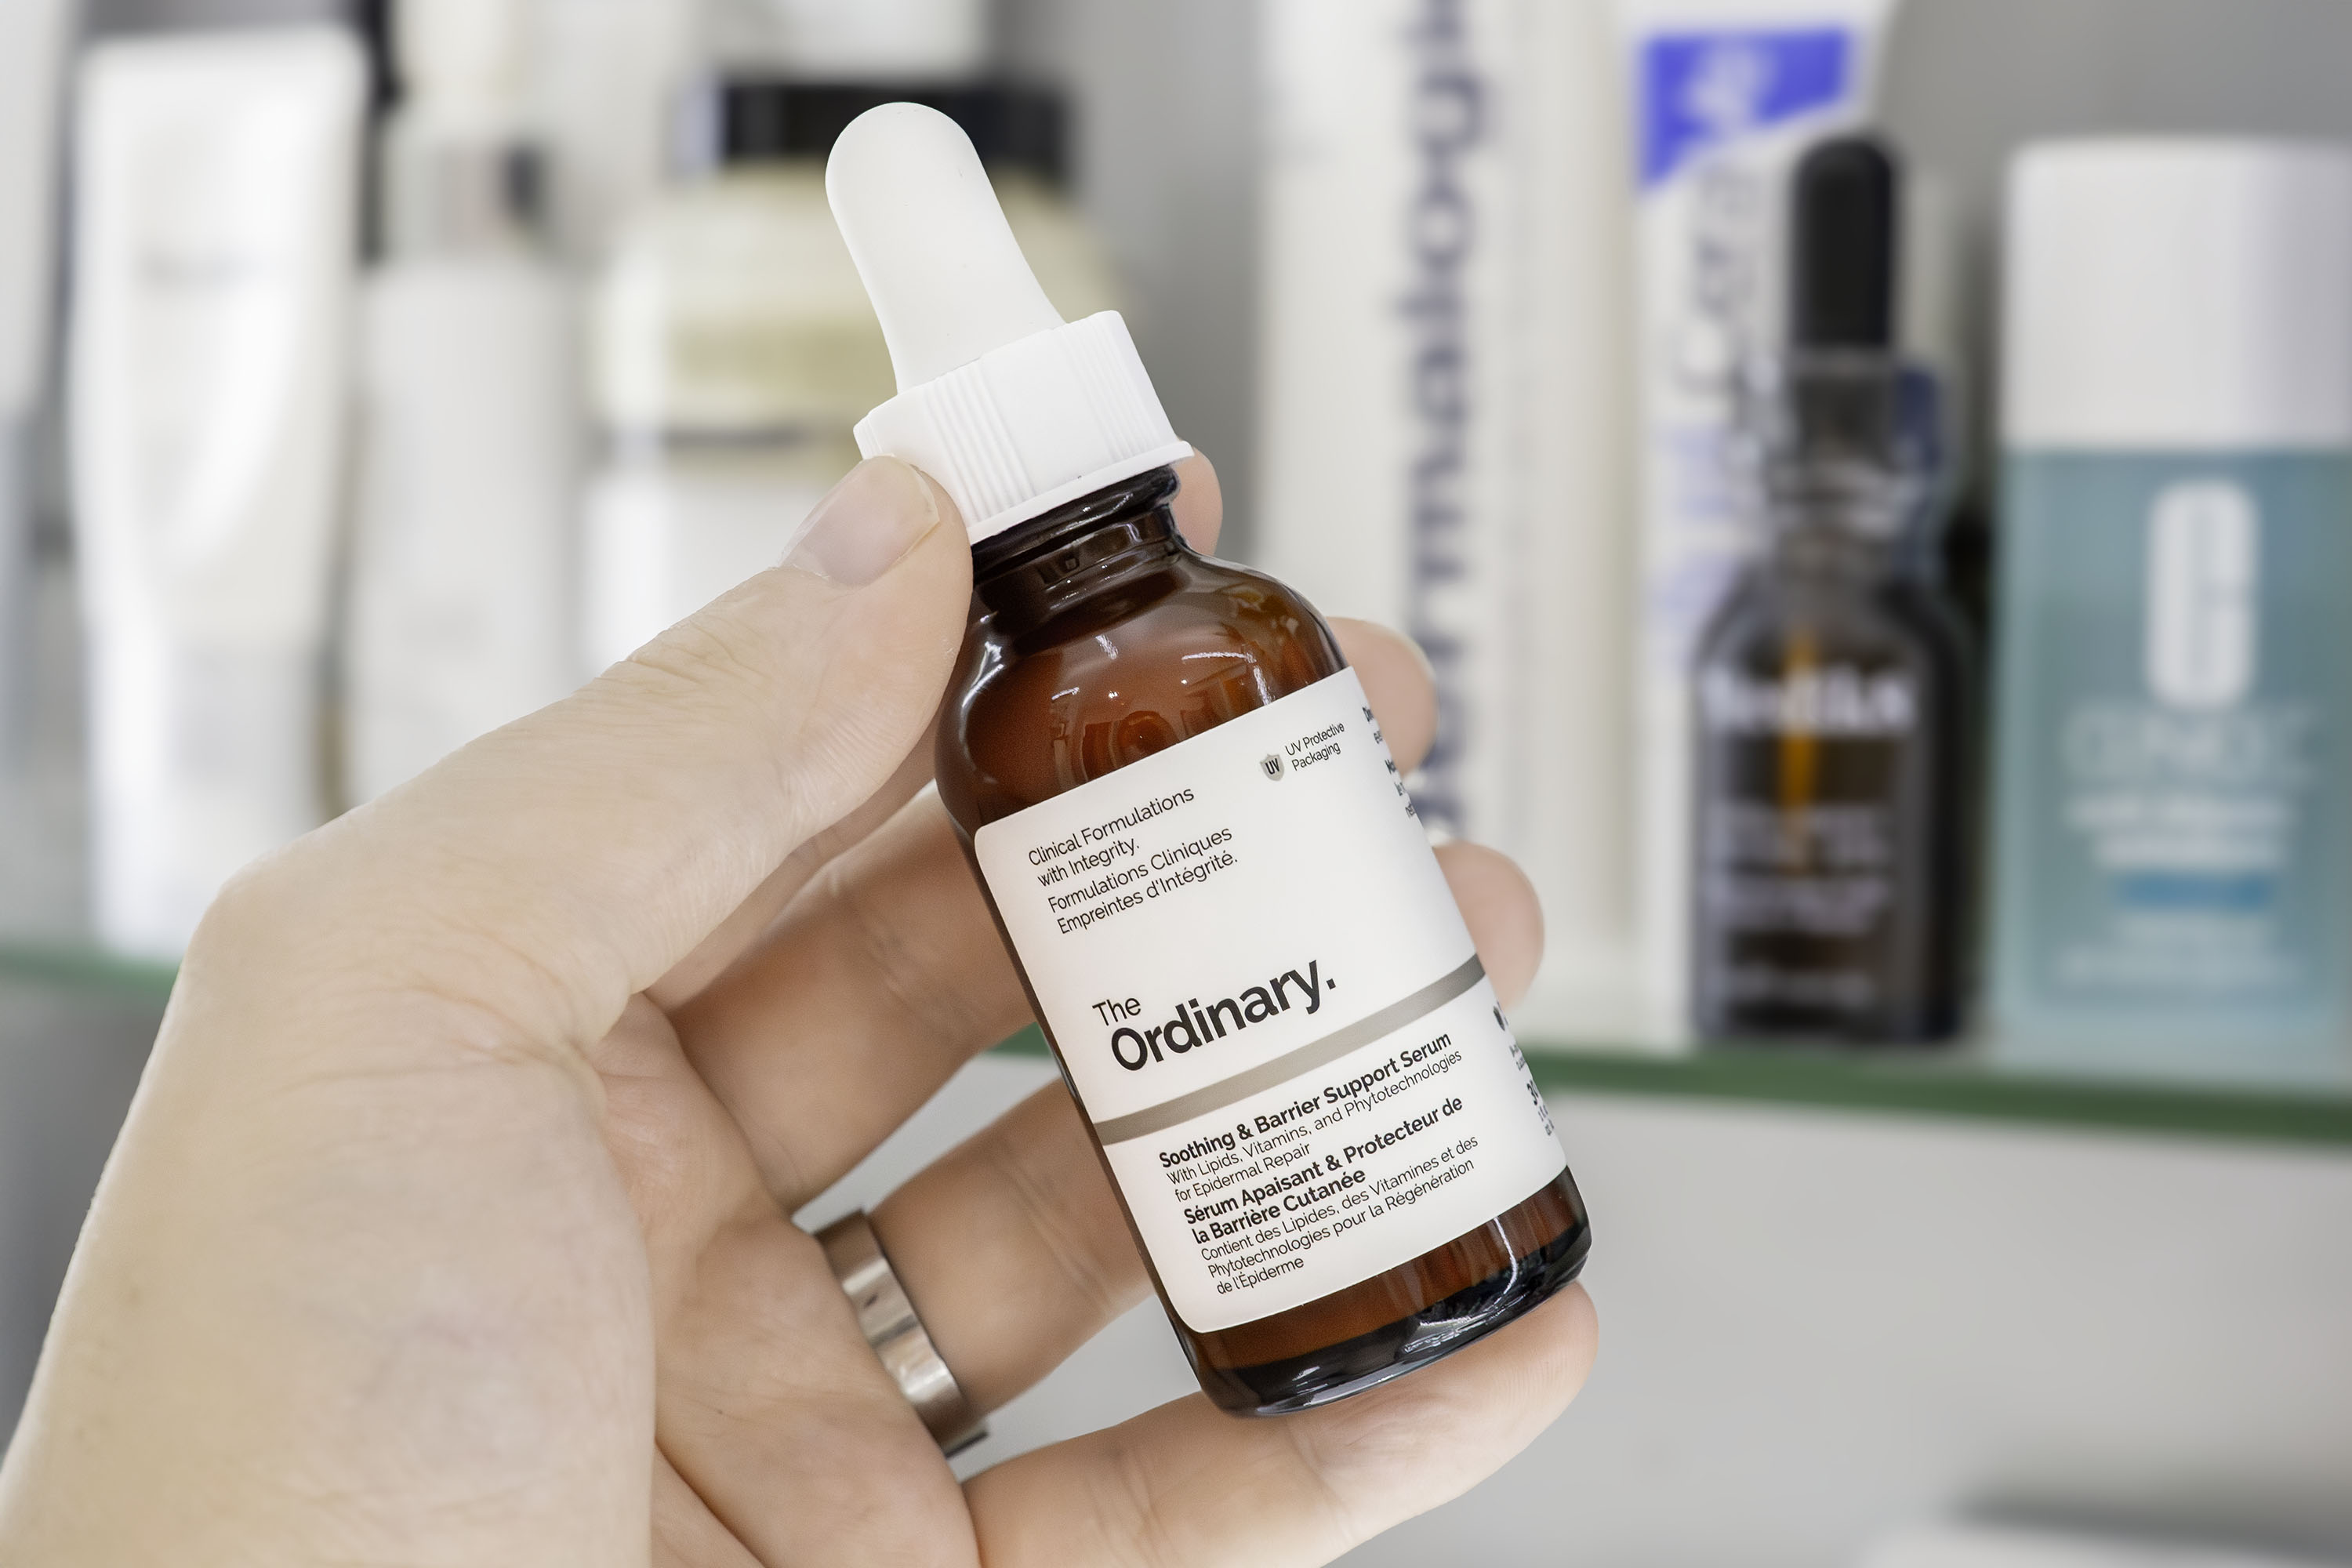 The Ordinary Soothing & Barrier Support Serum: Calpol Pink Skincare